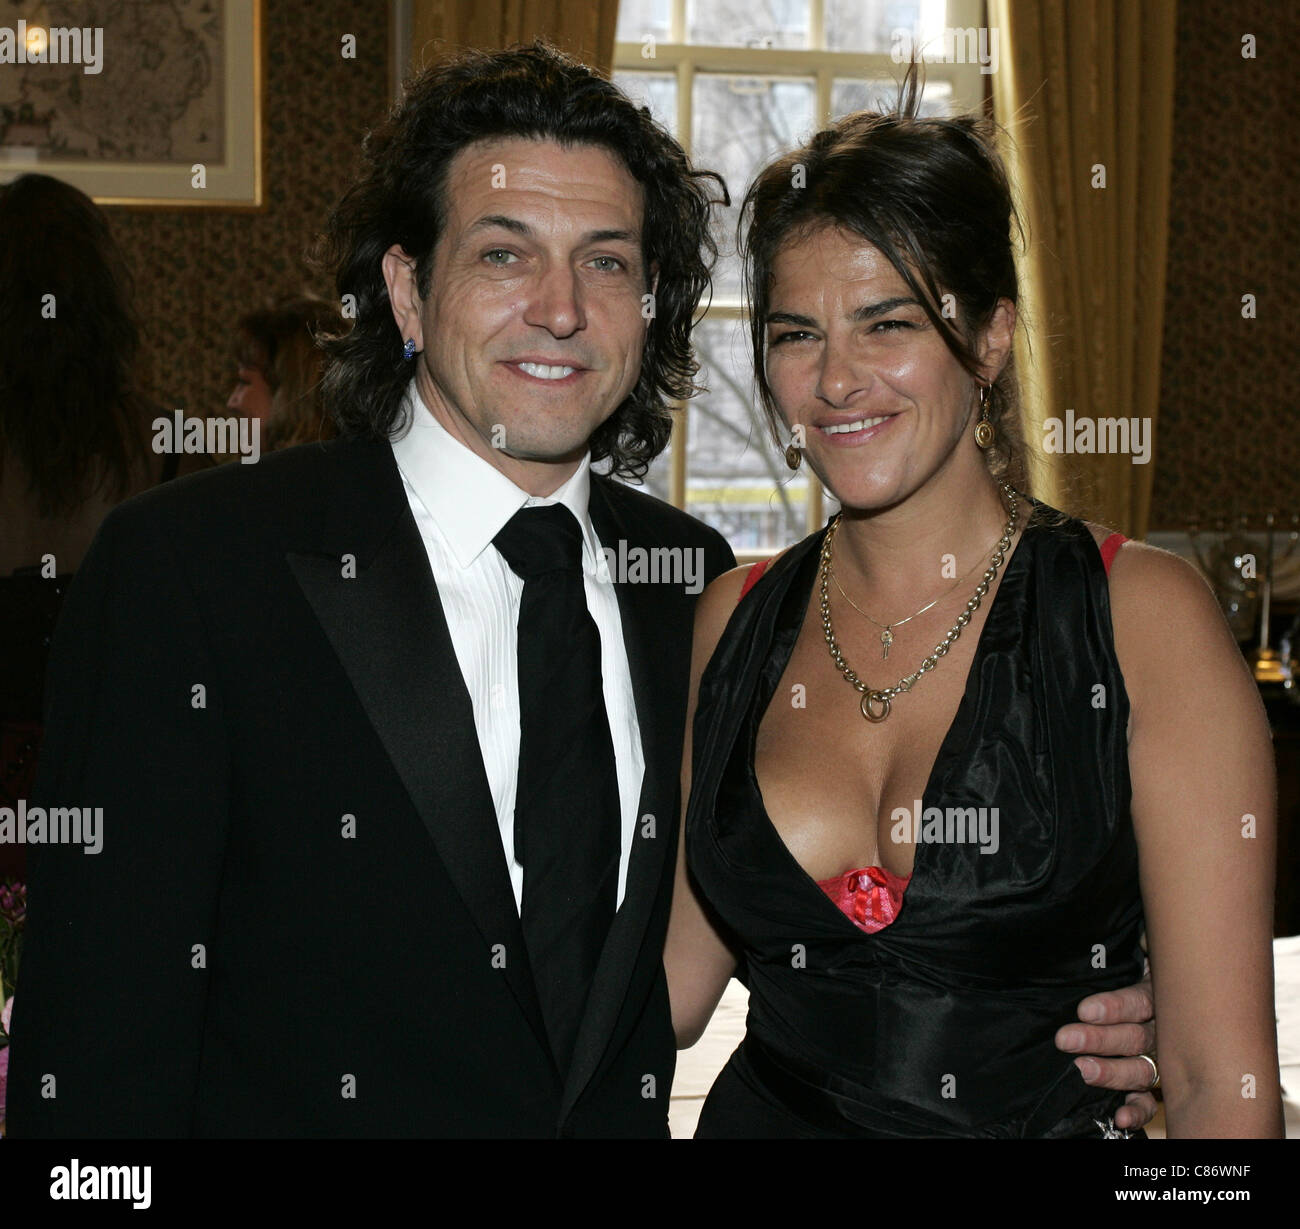 stephen webster and tracey emin at the WAVE Trauma Centre Crystal Ball Reception and auction in Belfast City Hall, Northern Ireland. Stock Photo